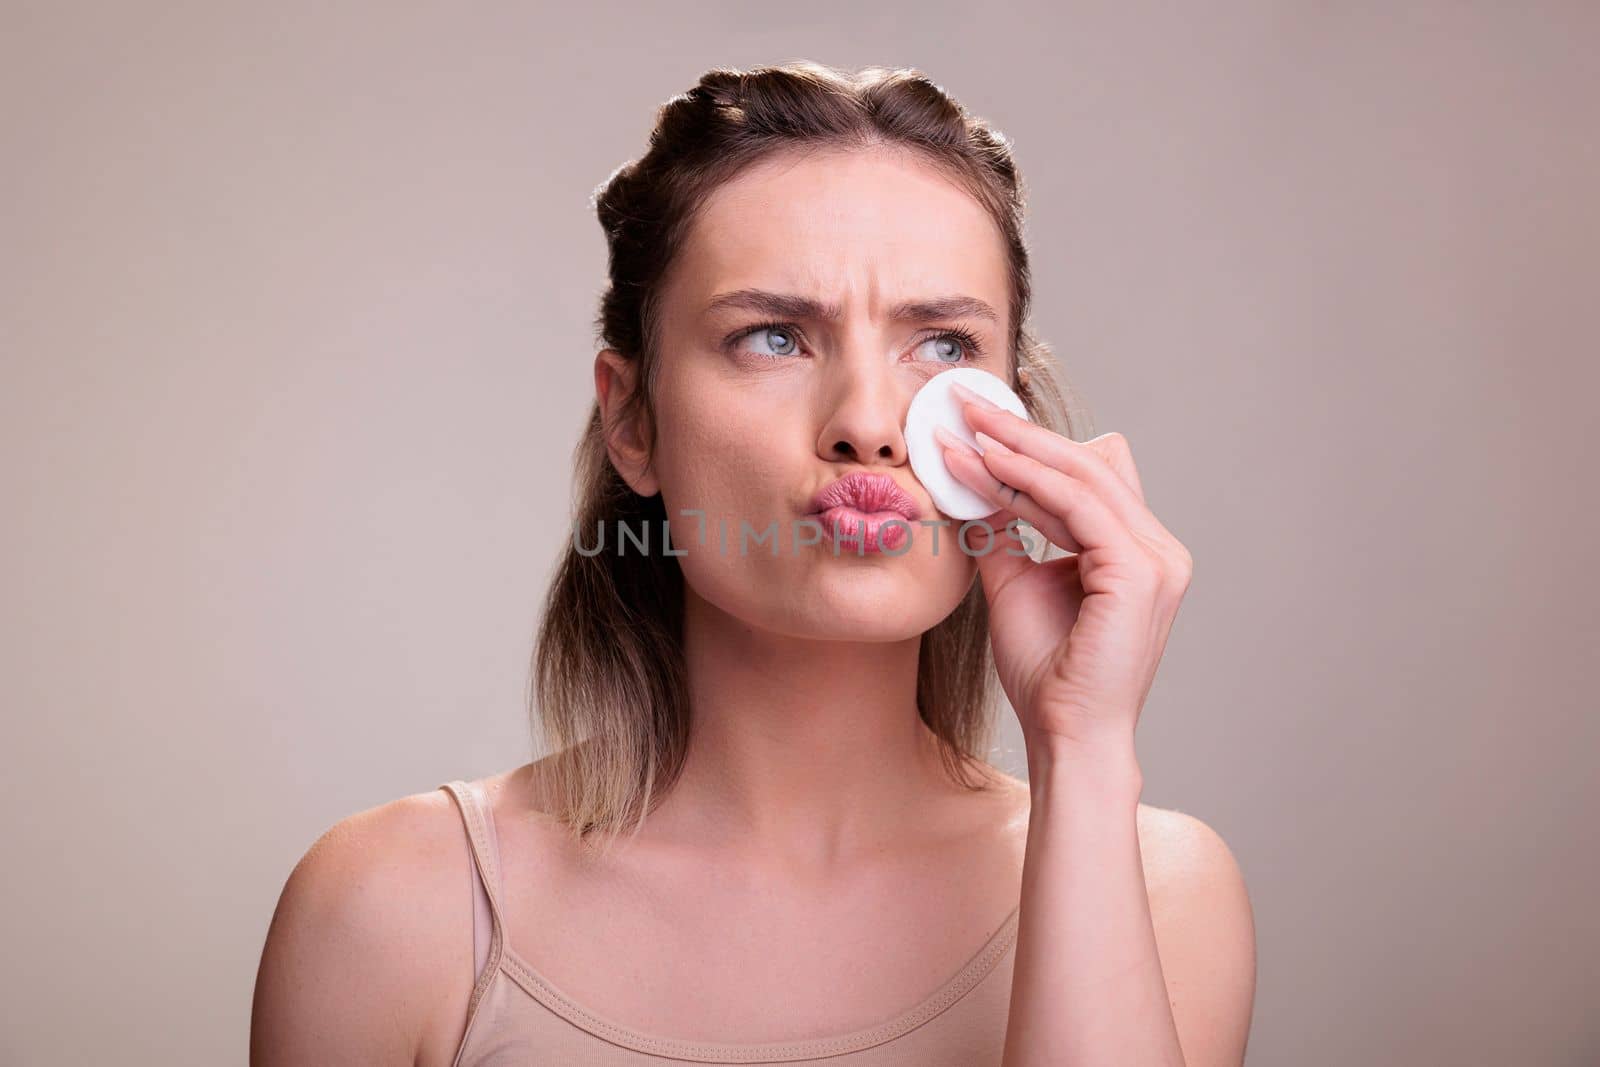 Skincare model cleansing face with cotton disk pad, doing skin treatment cleaning routine. Beautiful blonde young woman wearing beige top using micellar oil to remove make up